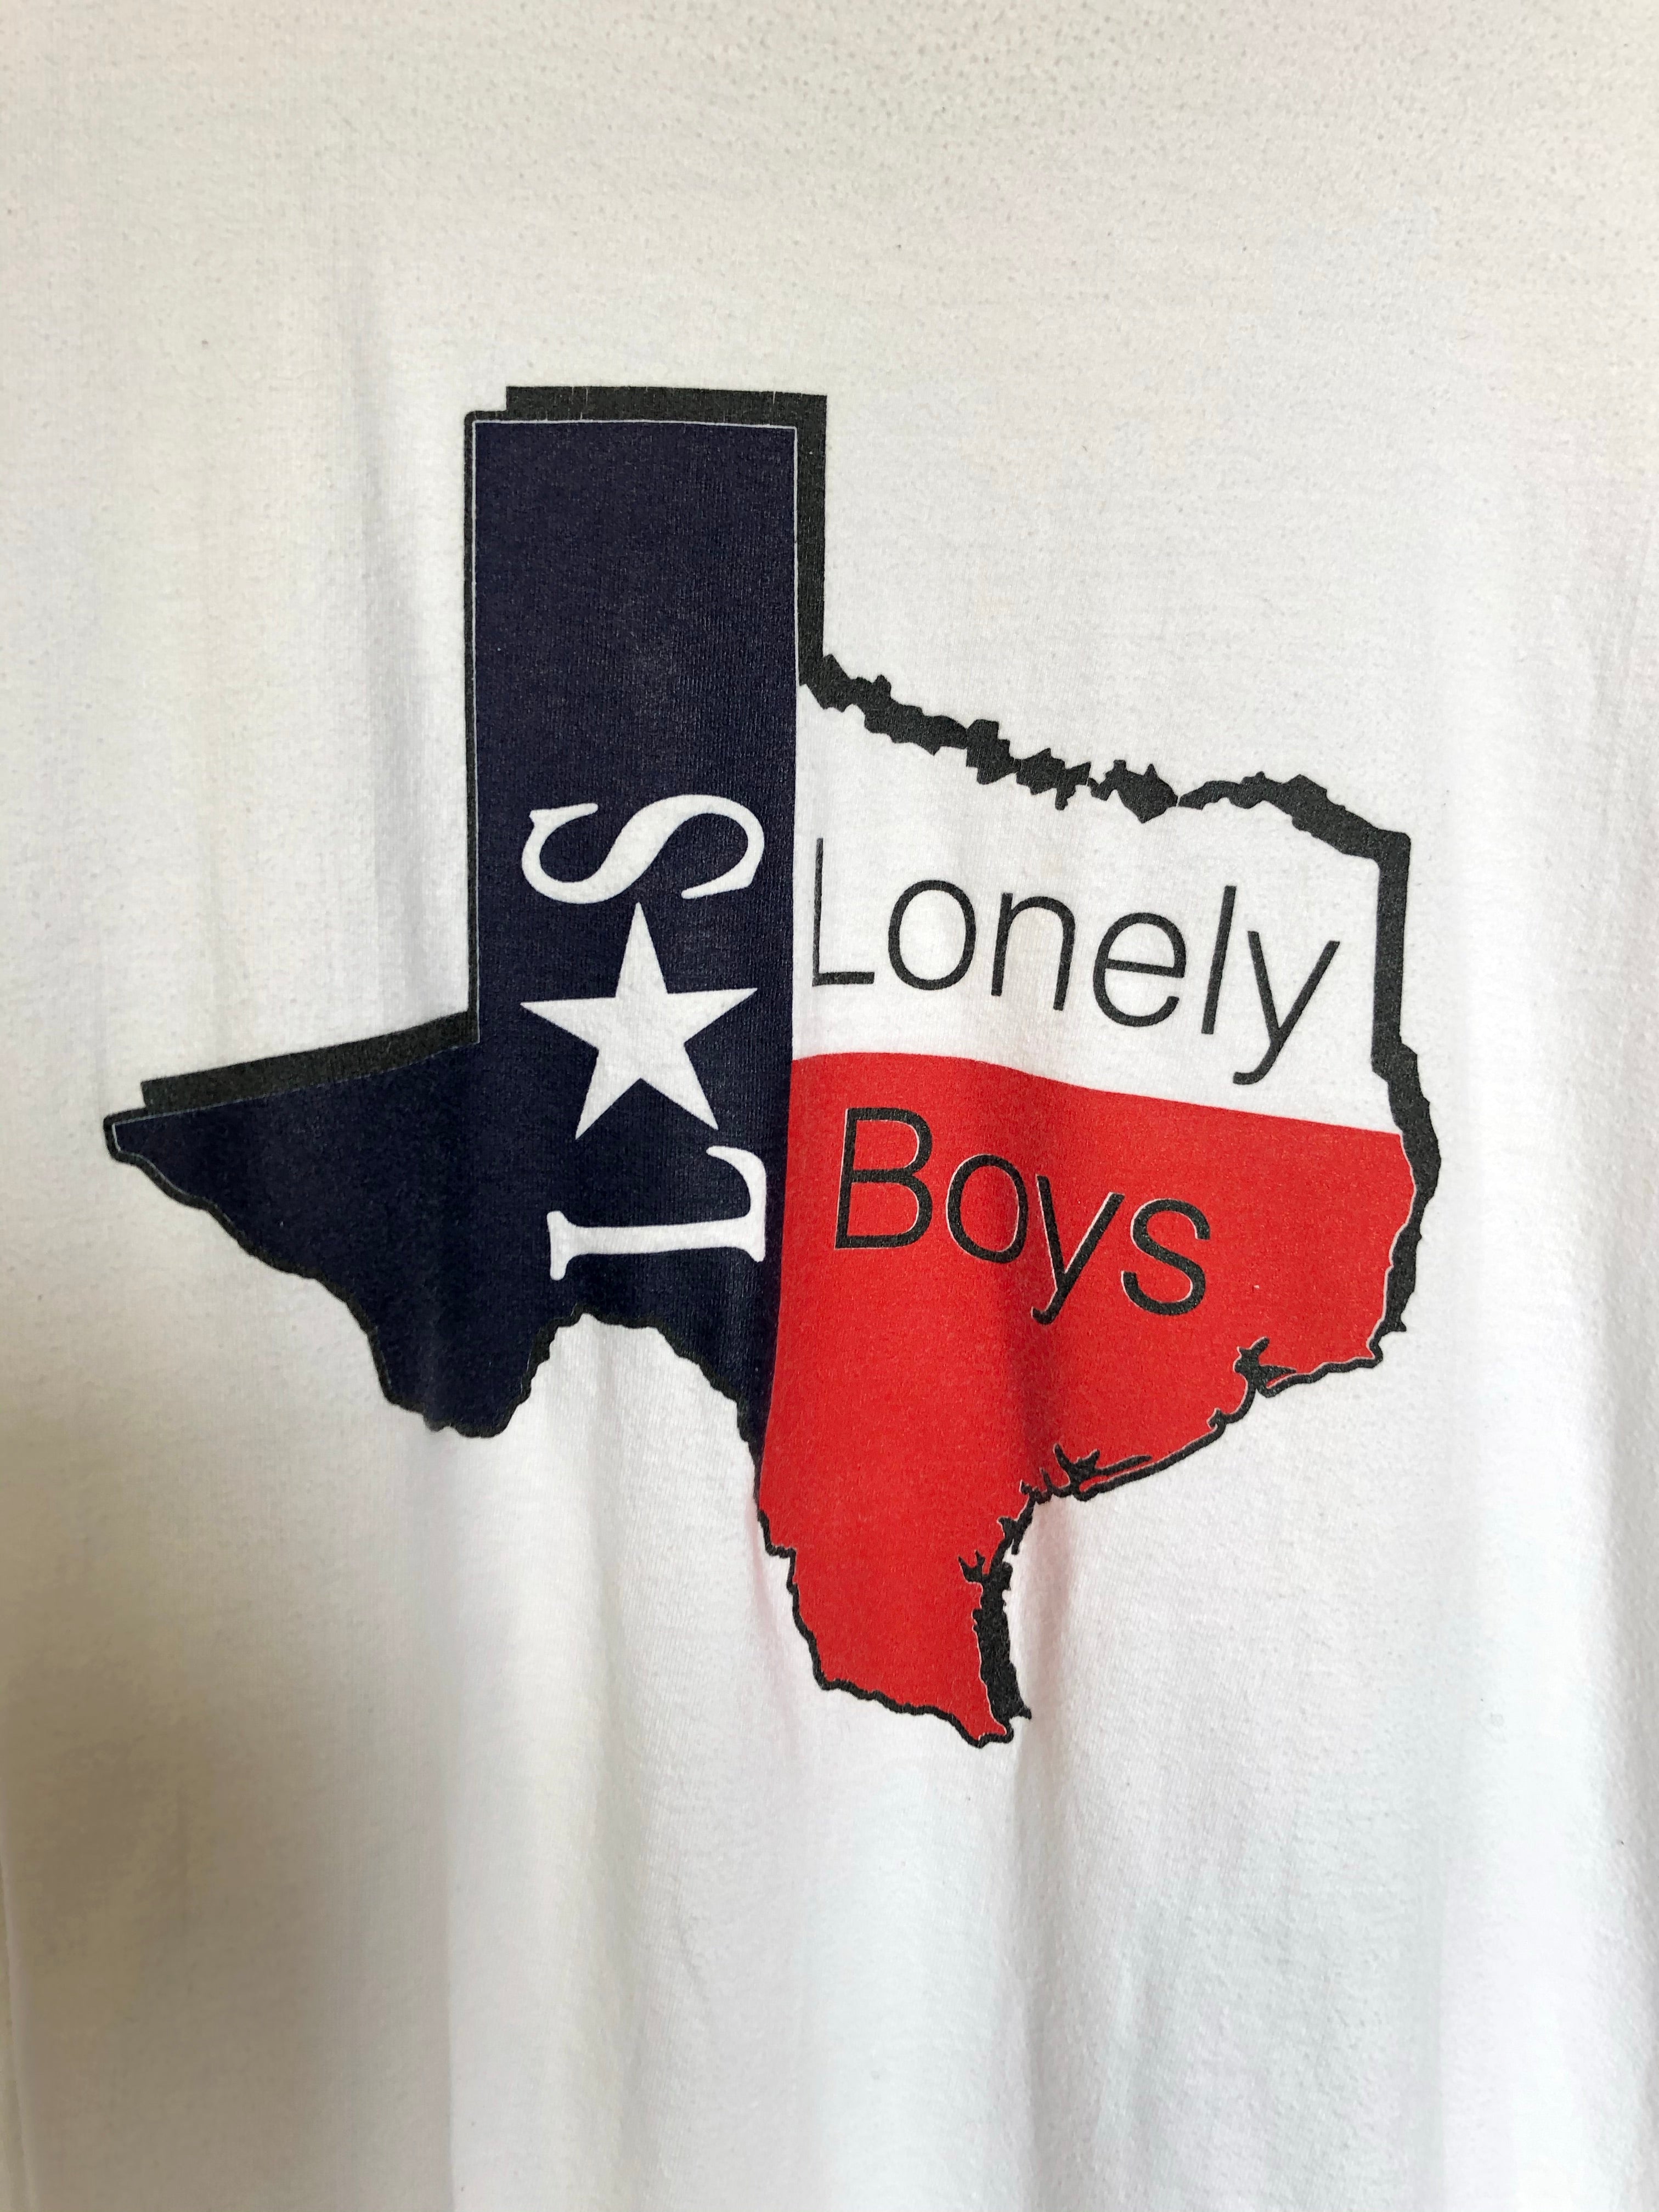 Rare 90’s Los Lonely Boys Concert Tour Tee